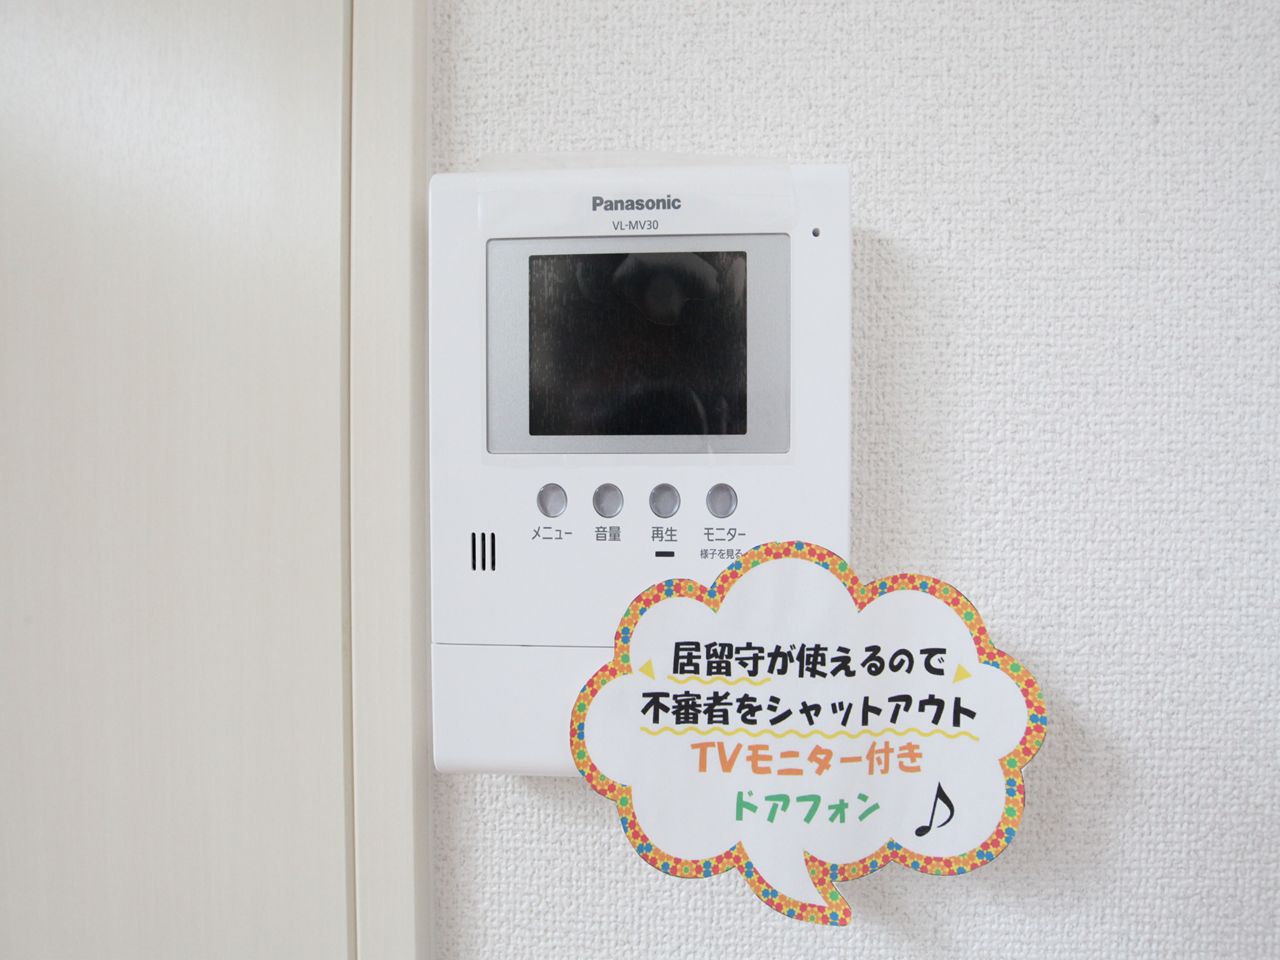 Security. Intercom with TV monitor